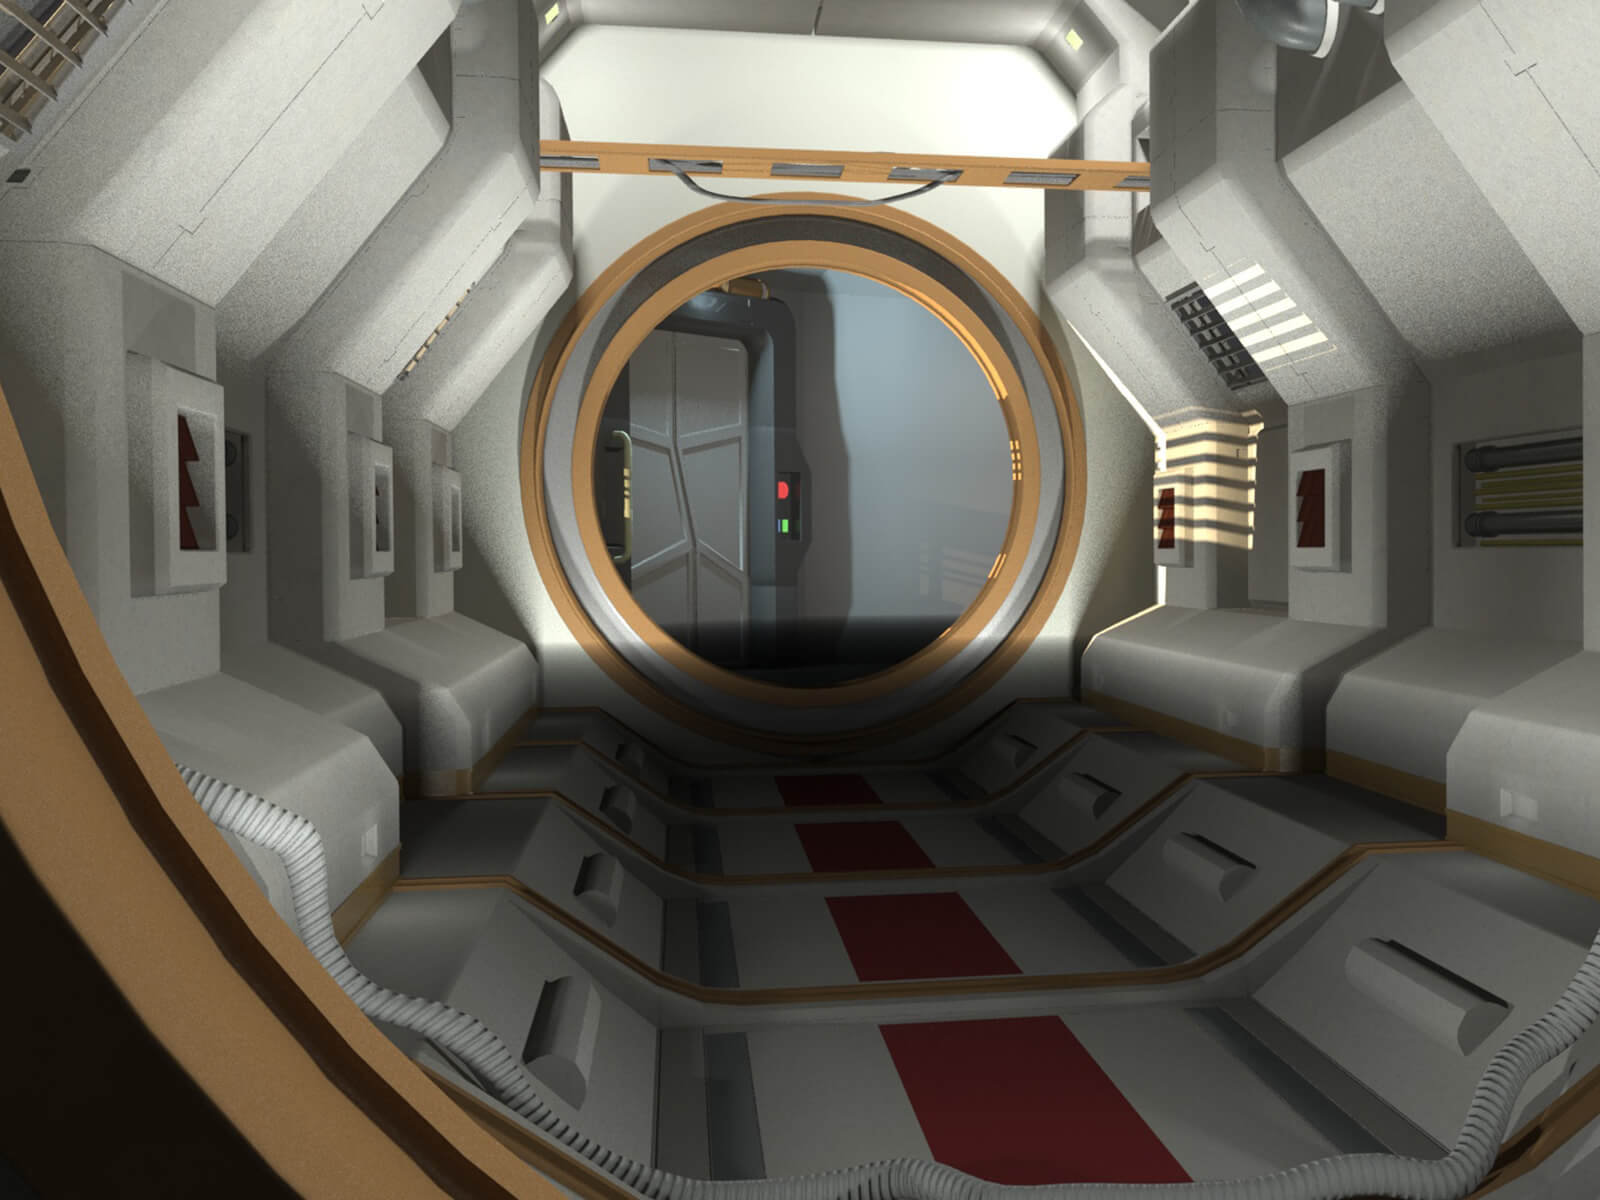 Cylindrical white and red corridor in a sterile, futuristic style ending at a round porthole to another area.